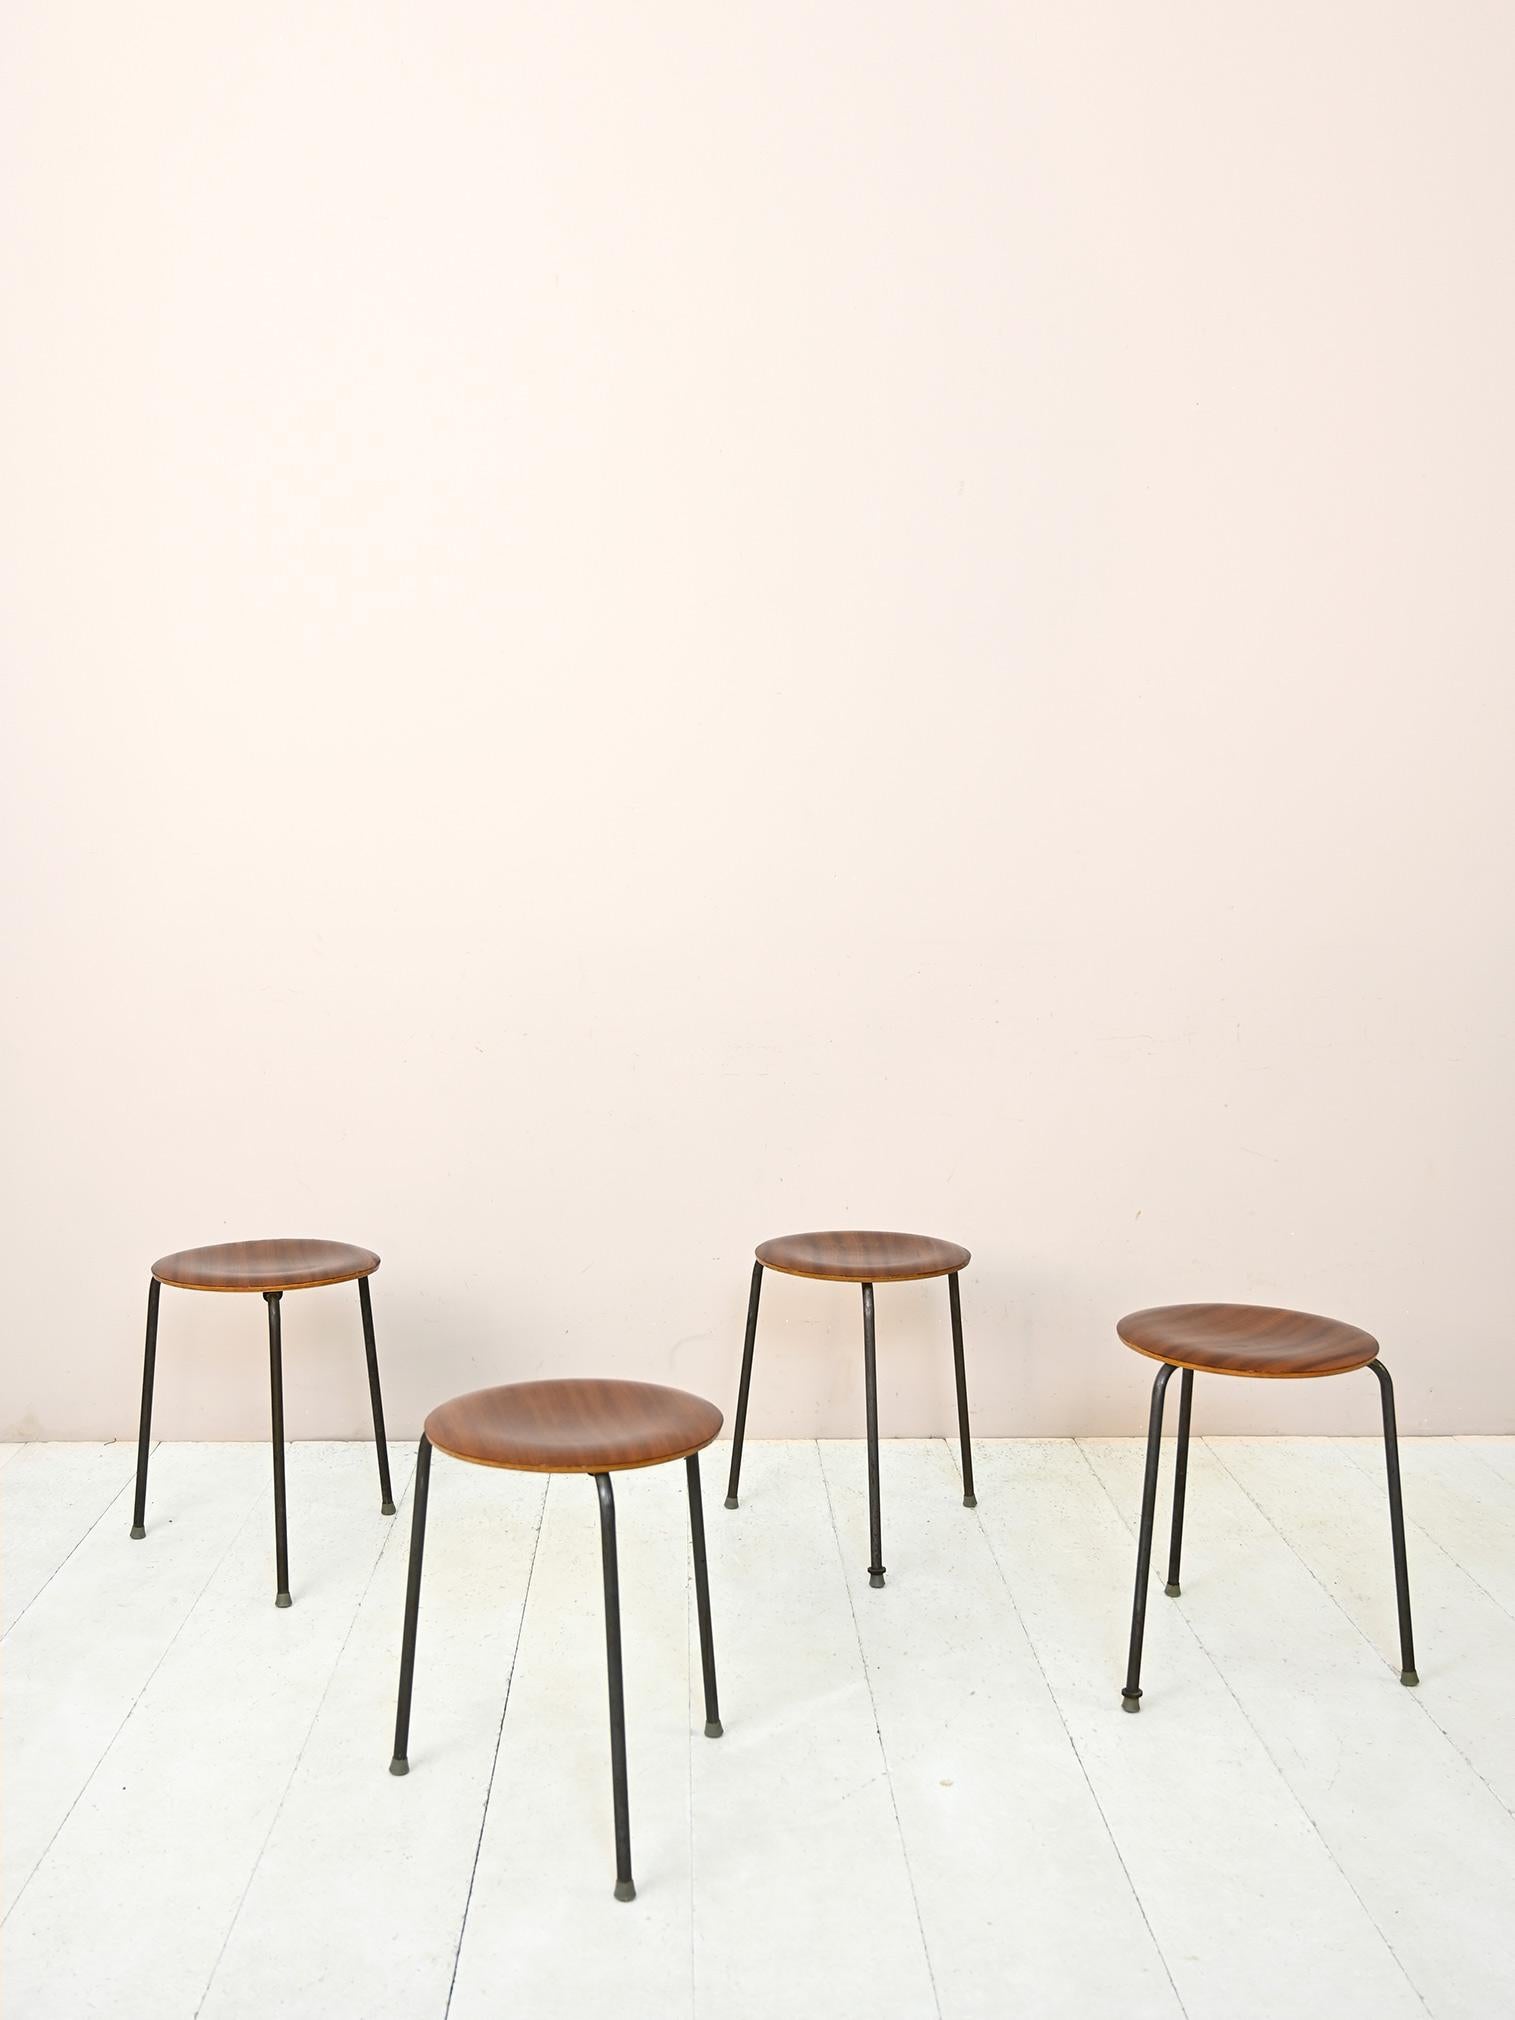 Set of 4 original vintage Scandinavian stools.

Featuring simple, minimal lines, they have a tubular metal frame forming the legs and a molded teak wood seat.
Perfect for use as additional seating for guests, but also as nightstands and small